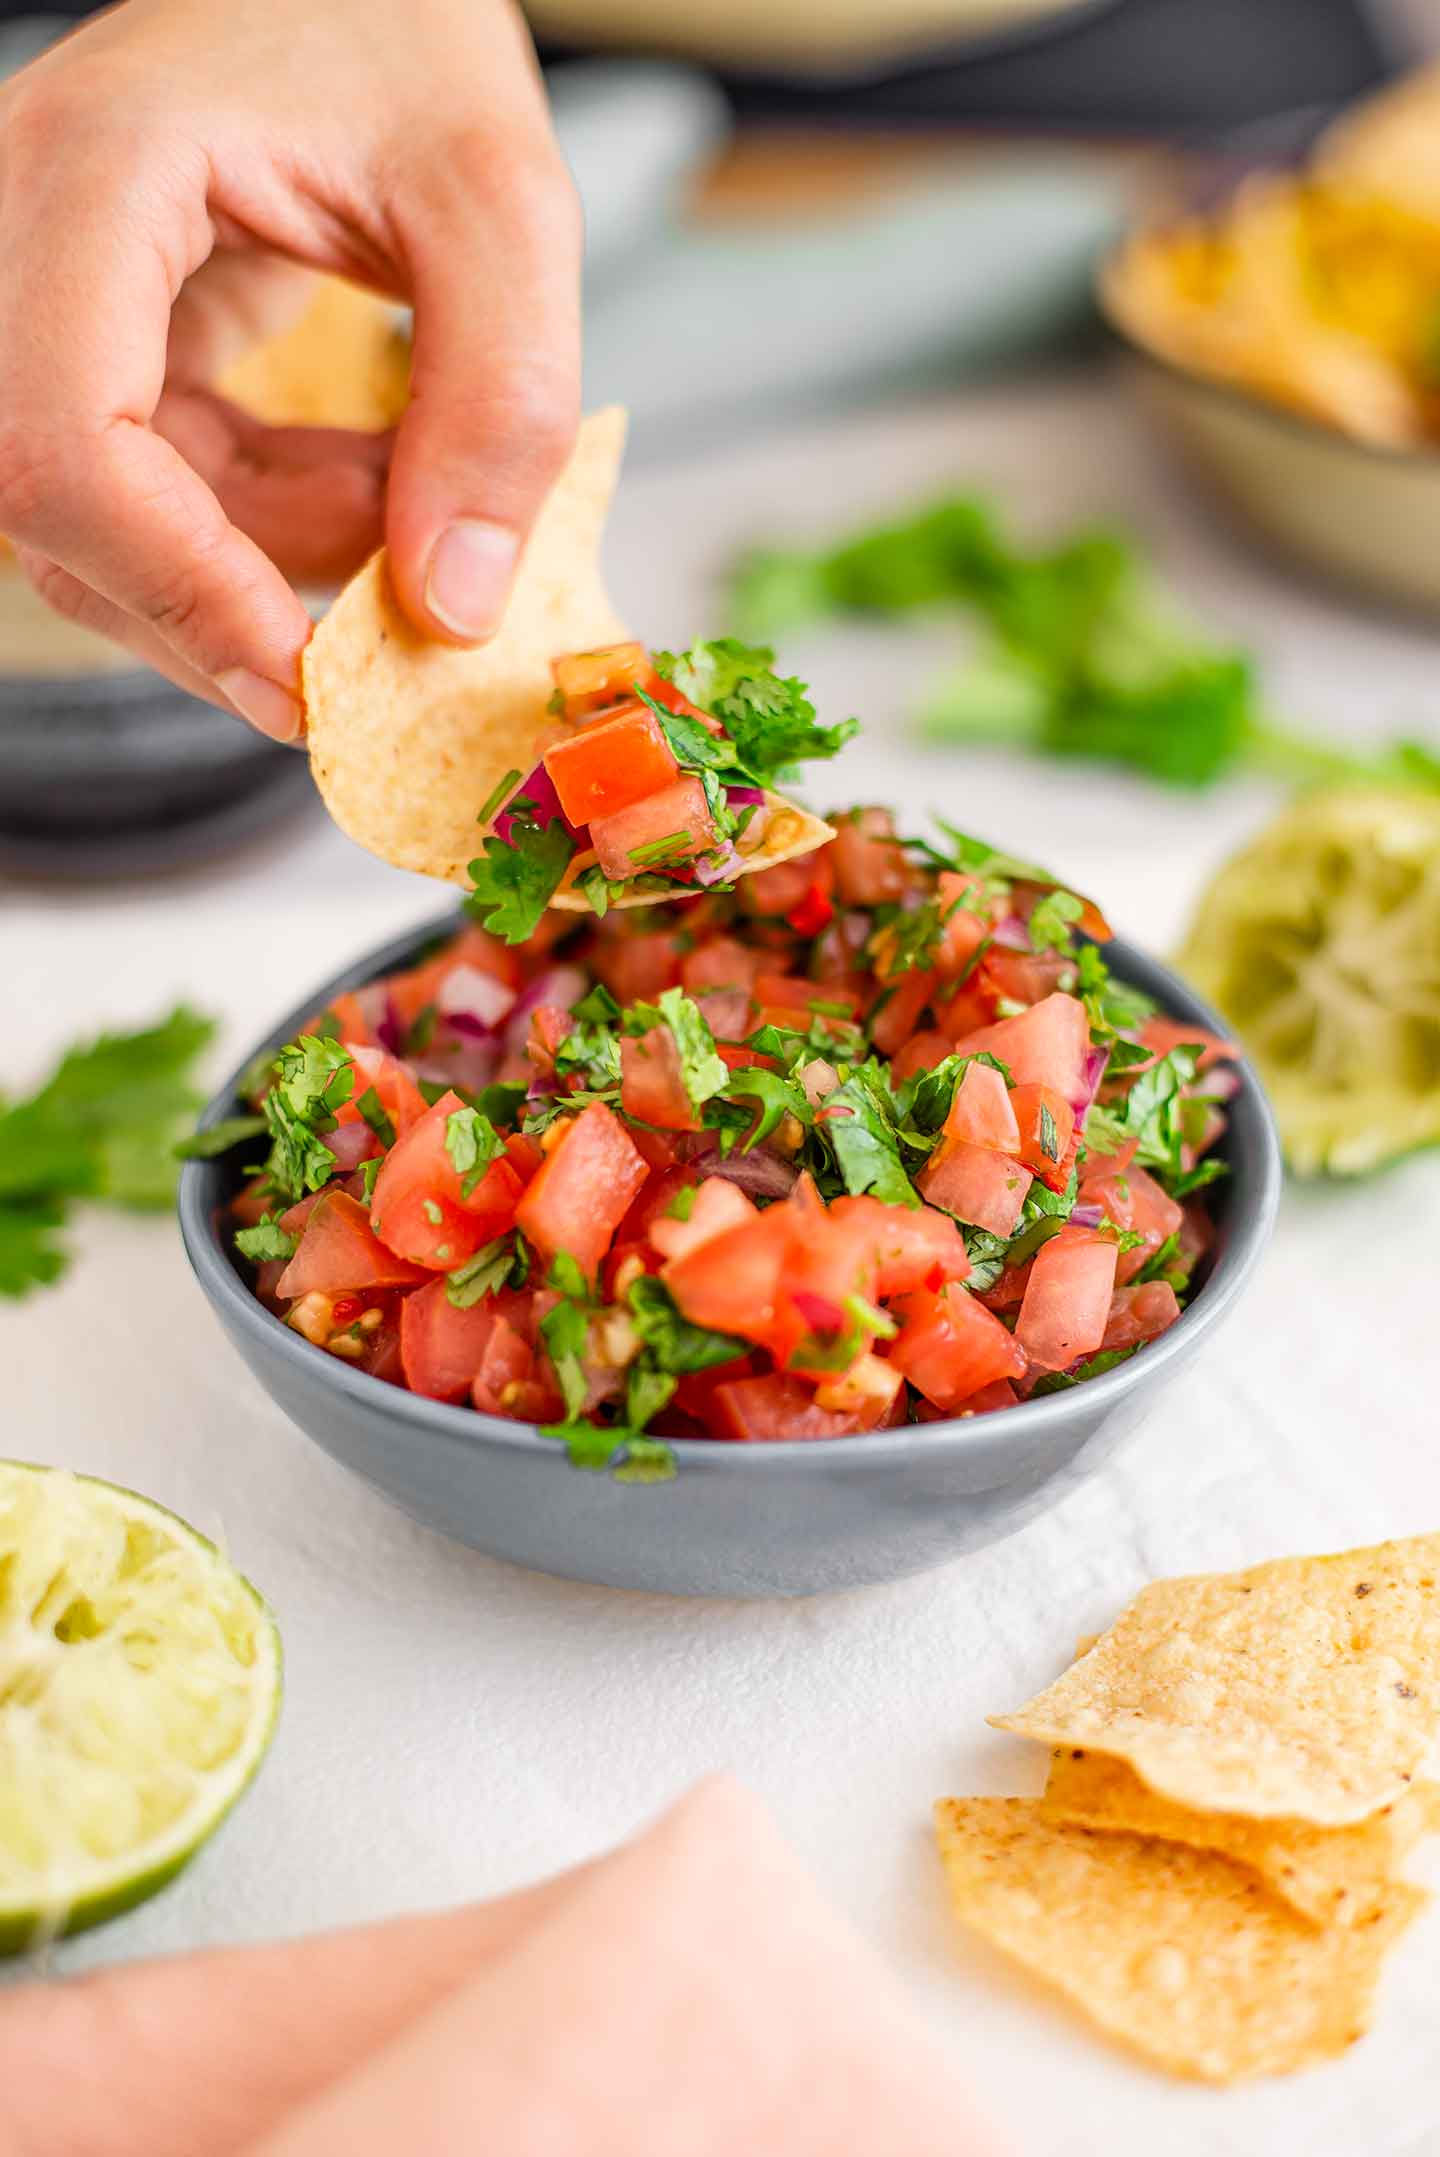 Salsa fresca with diced tomato, red onion, and cilantro fills a small dish. A hand scoops a tortilla chip into the chunky salsa.